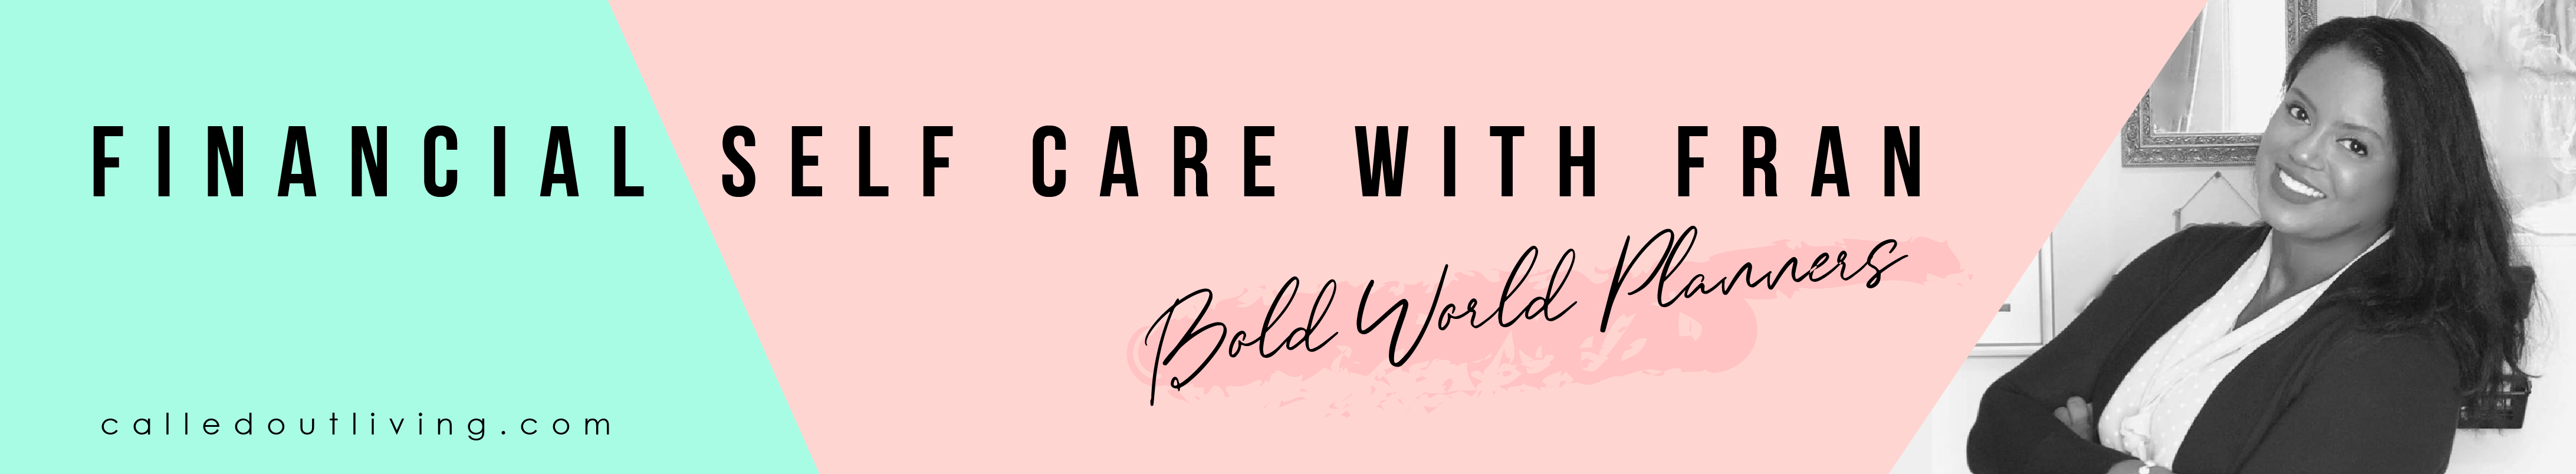 5 steps to financial self care with Fran Bold World Planners-05